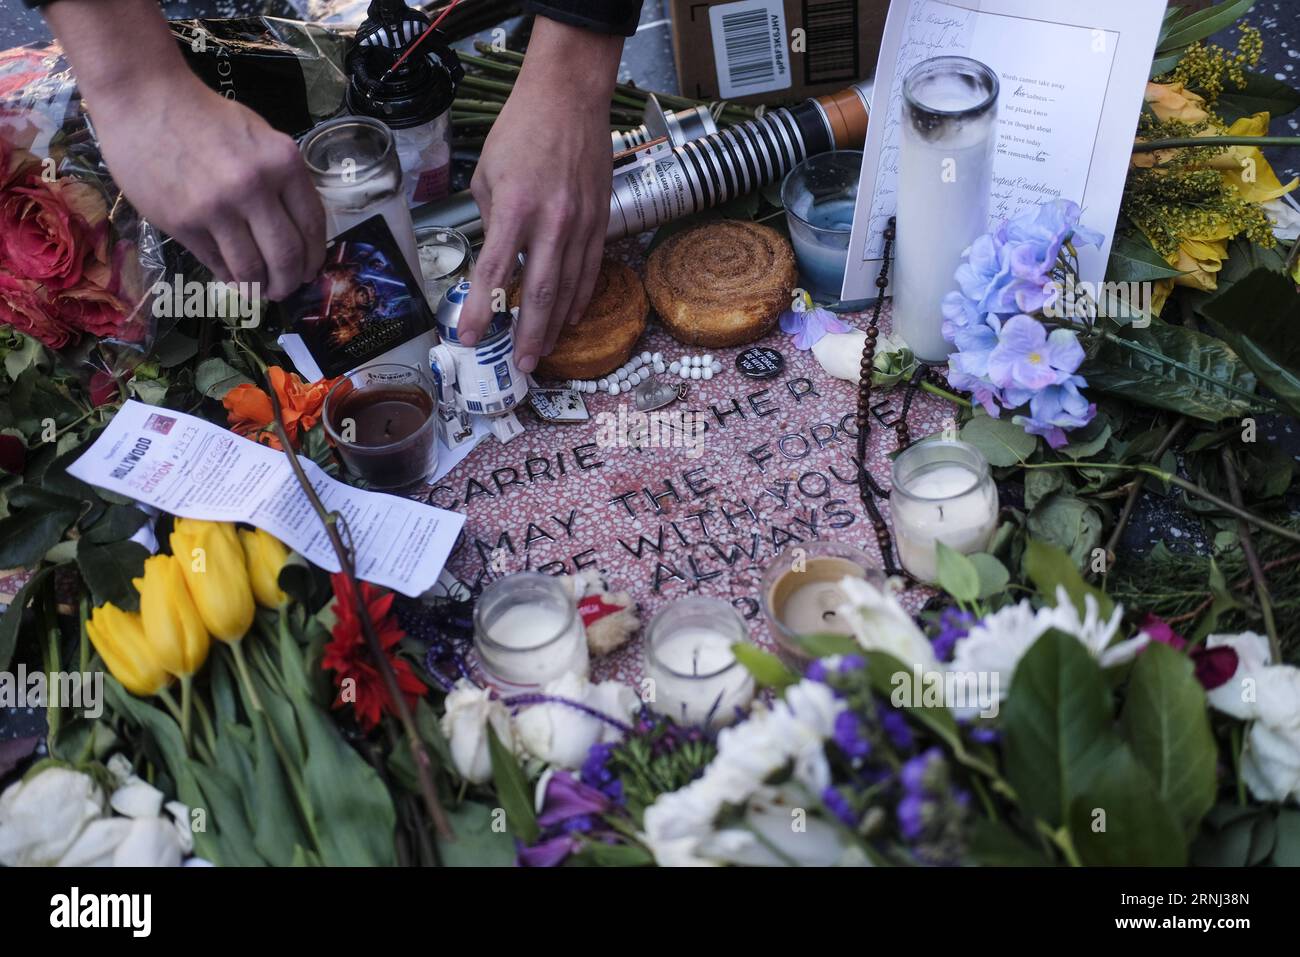 LOS ANGELES, Dec. 29, 2016 -- Flowers and candles surround an impromptu memorial created on a blank Hollywood Walk of Fame star by fans of late actress and author Carrie Fisher, in Los Angeles, California, the United States, on Dec. 29, 2016. Hollywood star Debbie Reynolds died of stroke Wednesday at the age of 84, one day after her daughter Carrie Fisher s death. Carrie Fisher, the actress best known as Princess Leia in the Star Wars movie franchise, died at the age of 60 on Tuesday morning, after suffering a heart attack on a flight last Friday. ) (zw) U.S.-LOS ANGELES-DEBBIE REYNOLDS-CARRIE Stock Photo